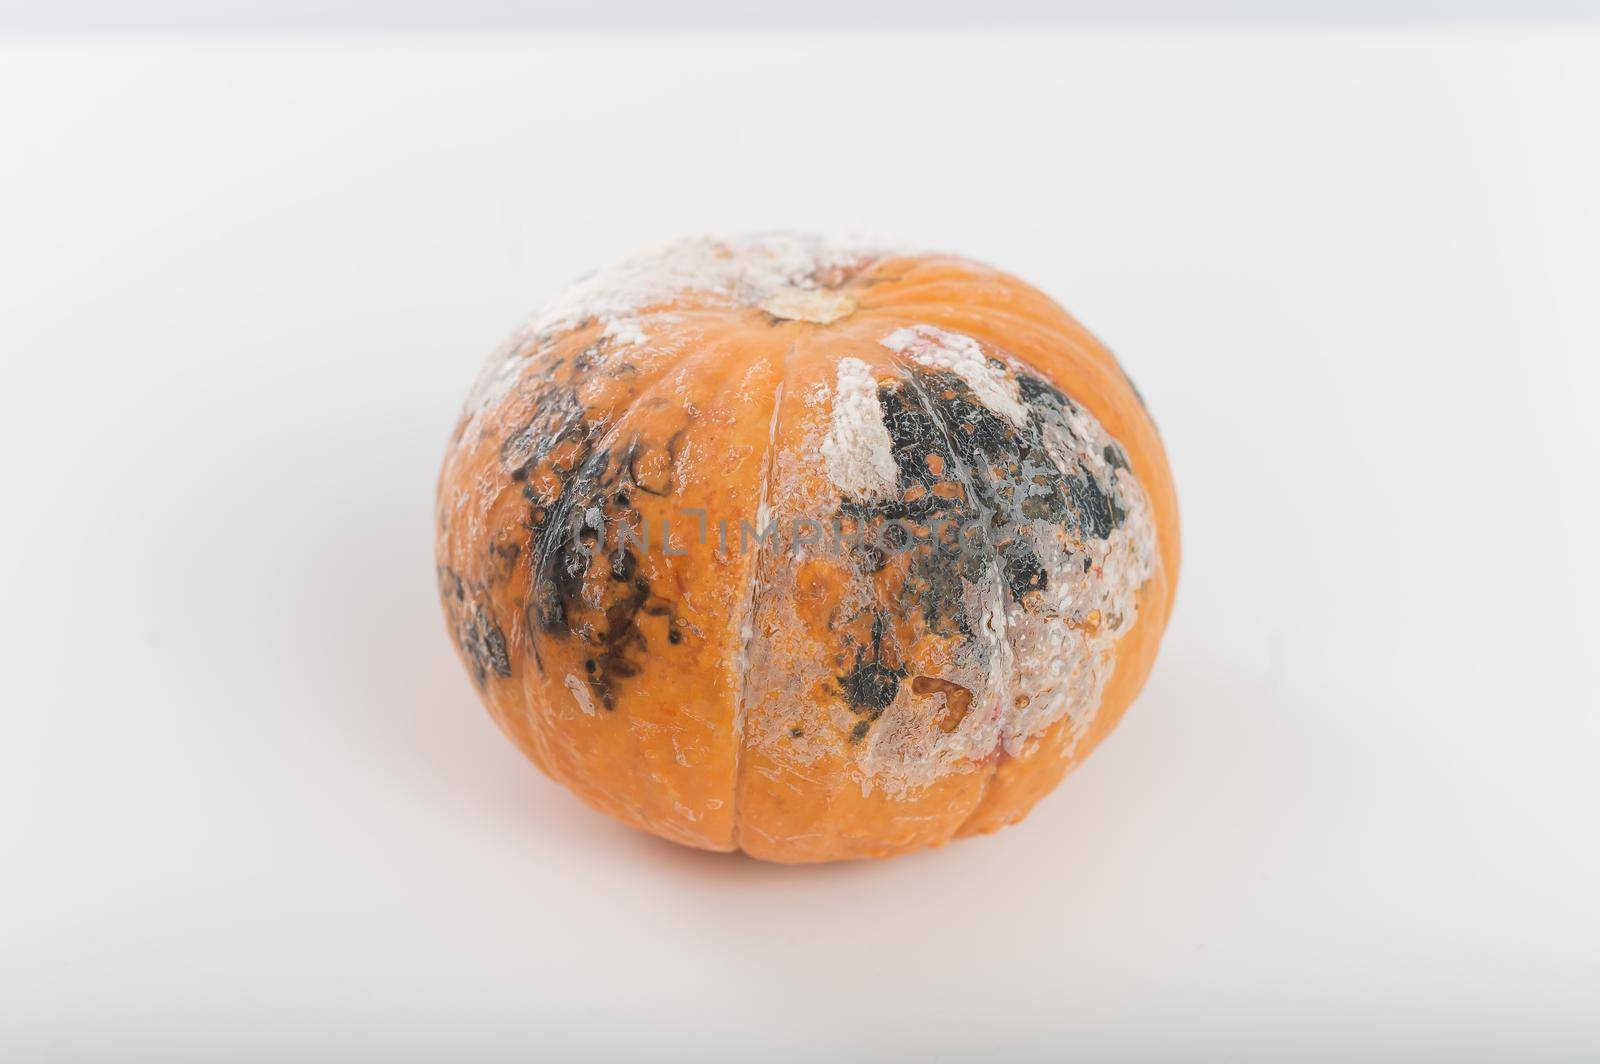 Spoiled pumpkin in mold on white background. by mrwed54